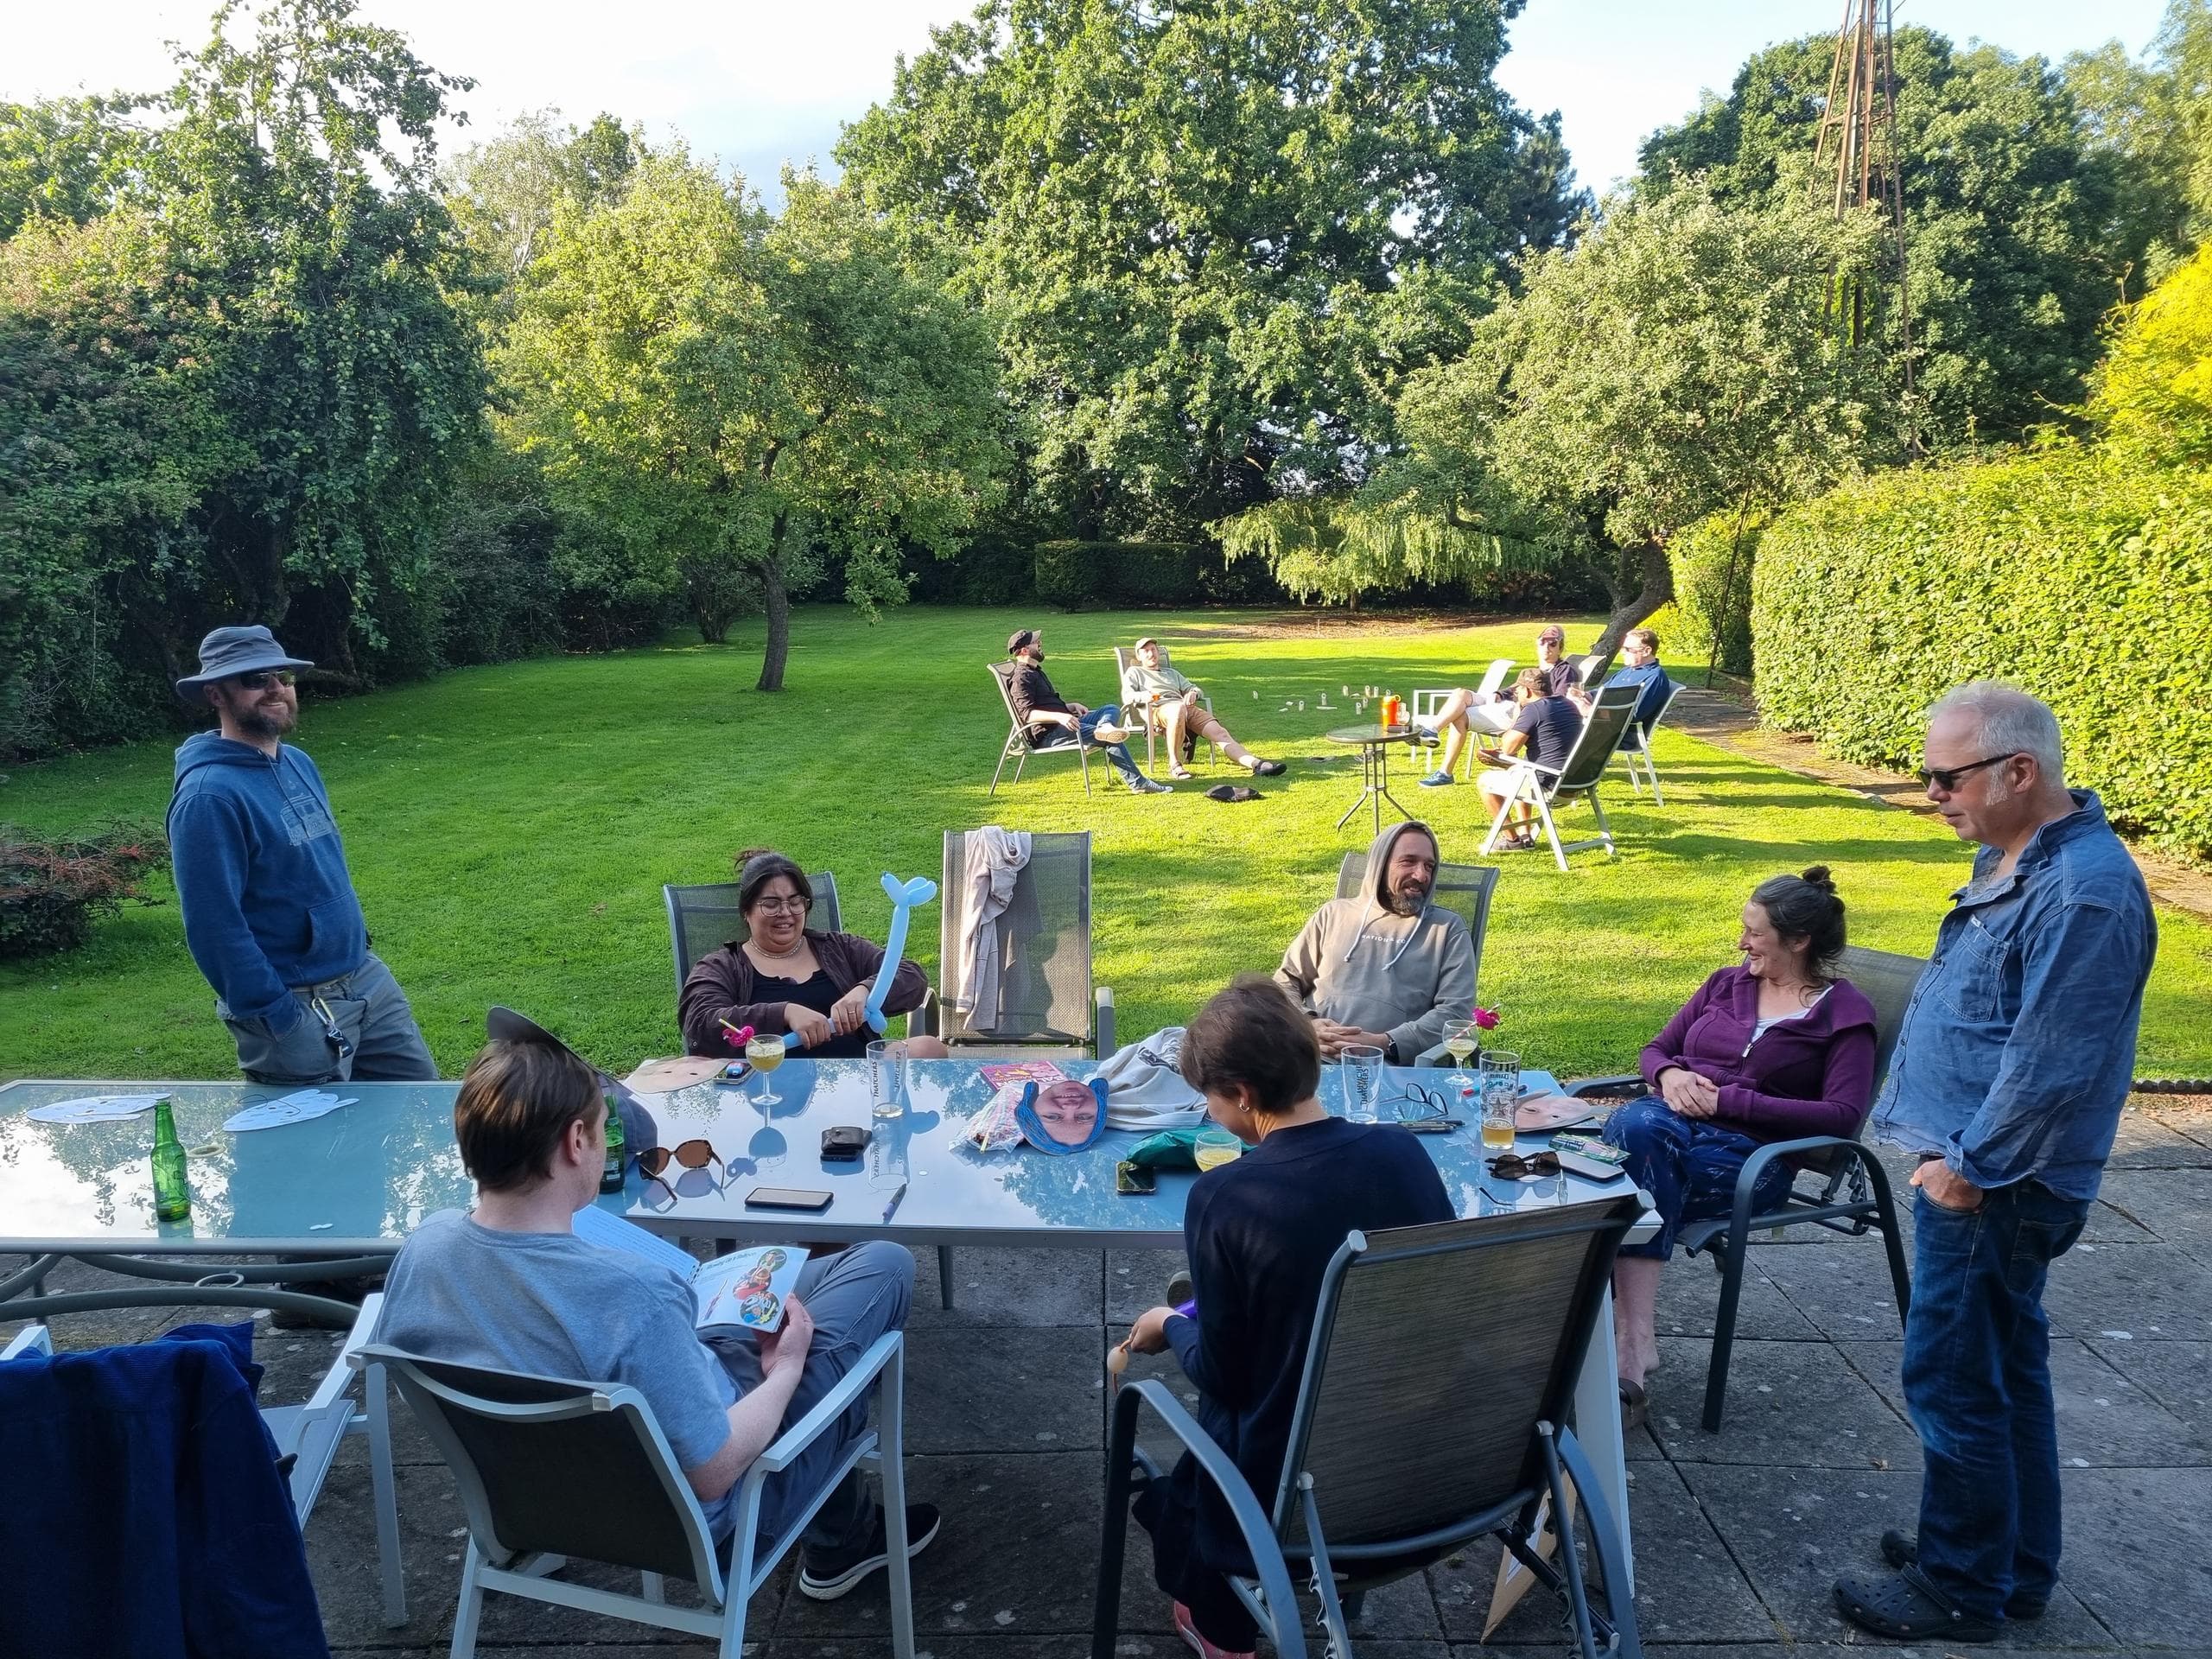 Two groups of Agile Collective staff sit in garden in the late afternoon